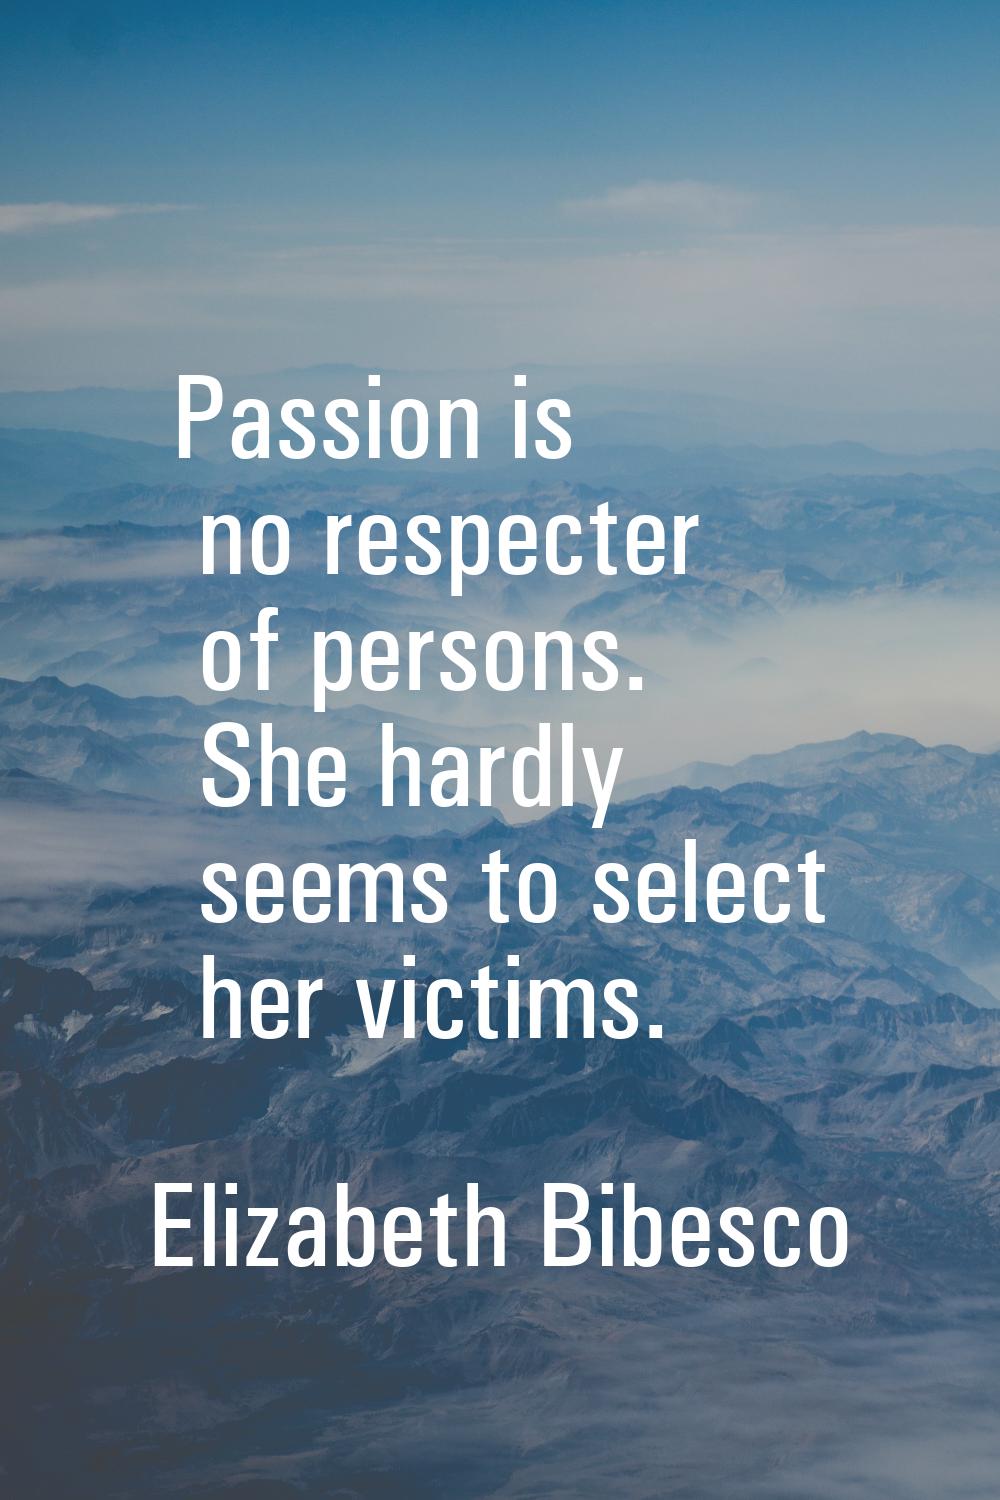 Passion is no respecter of persons. She hardly seems to select her victims.